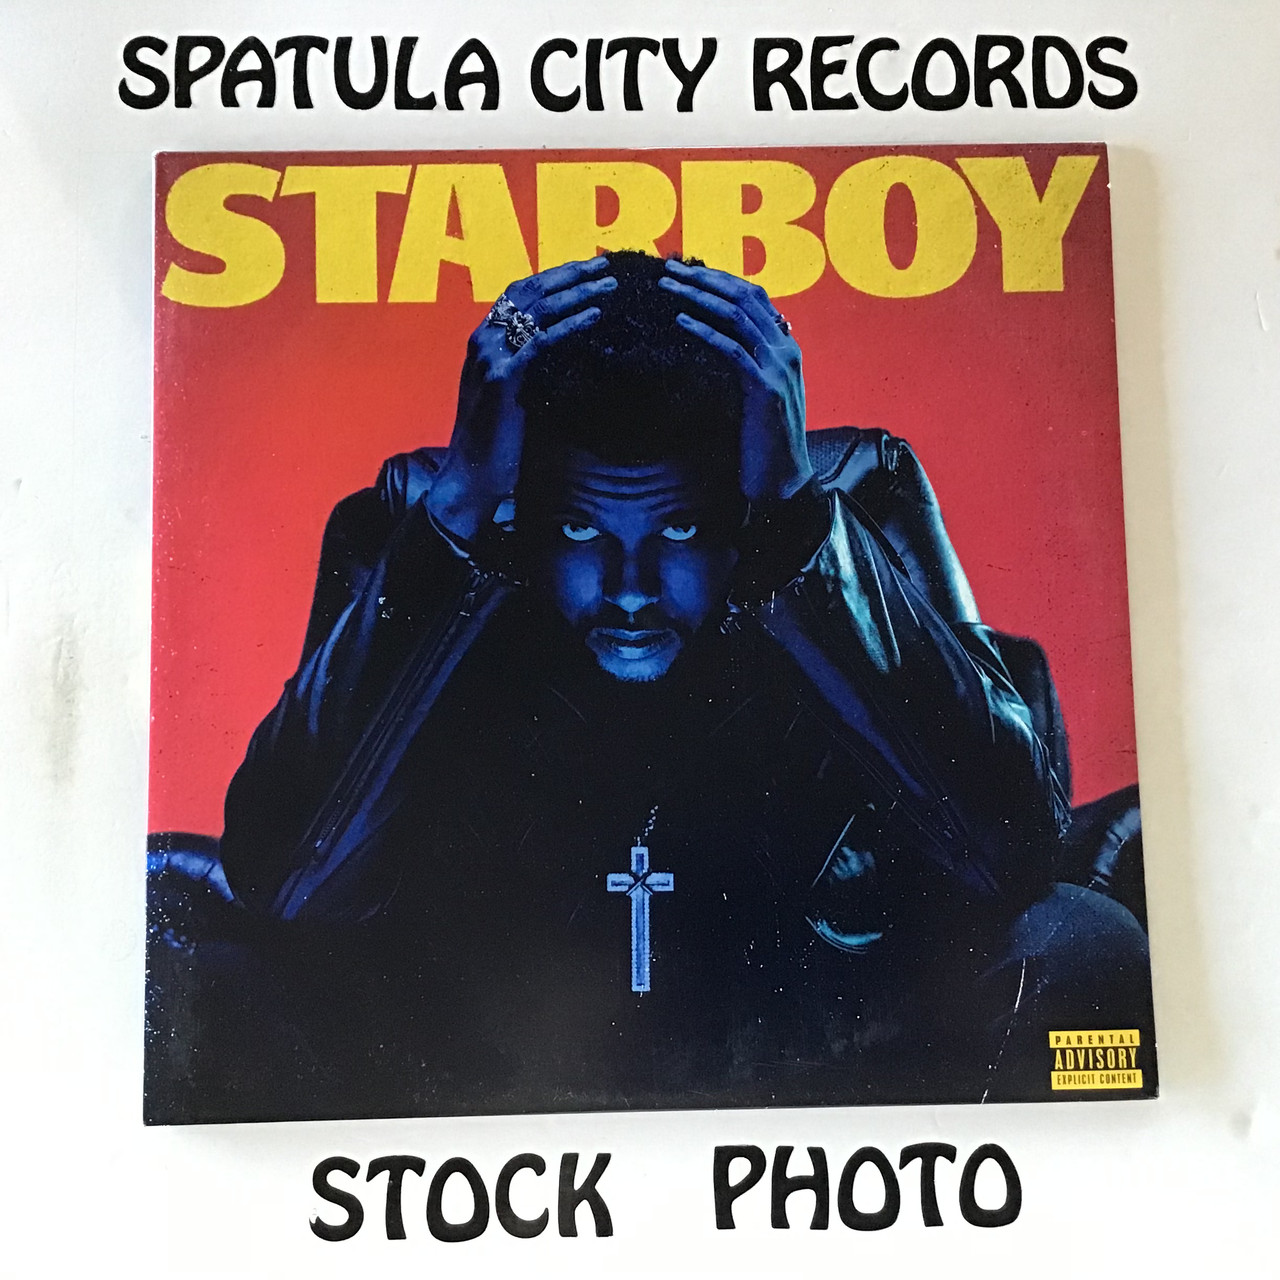 Weeknd, The - Starboy - double vinyl record LP